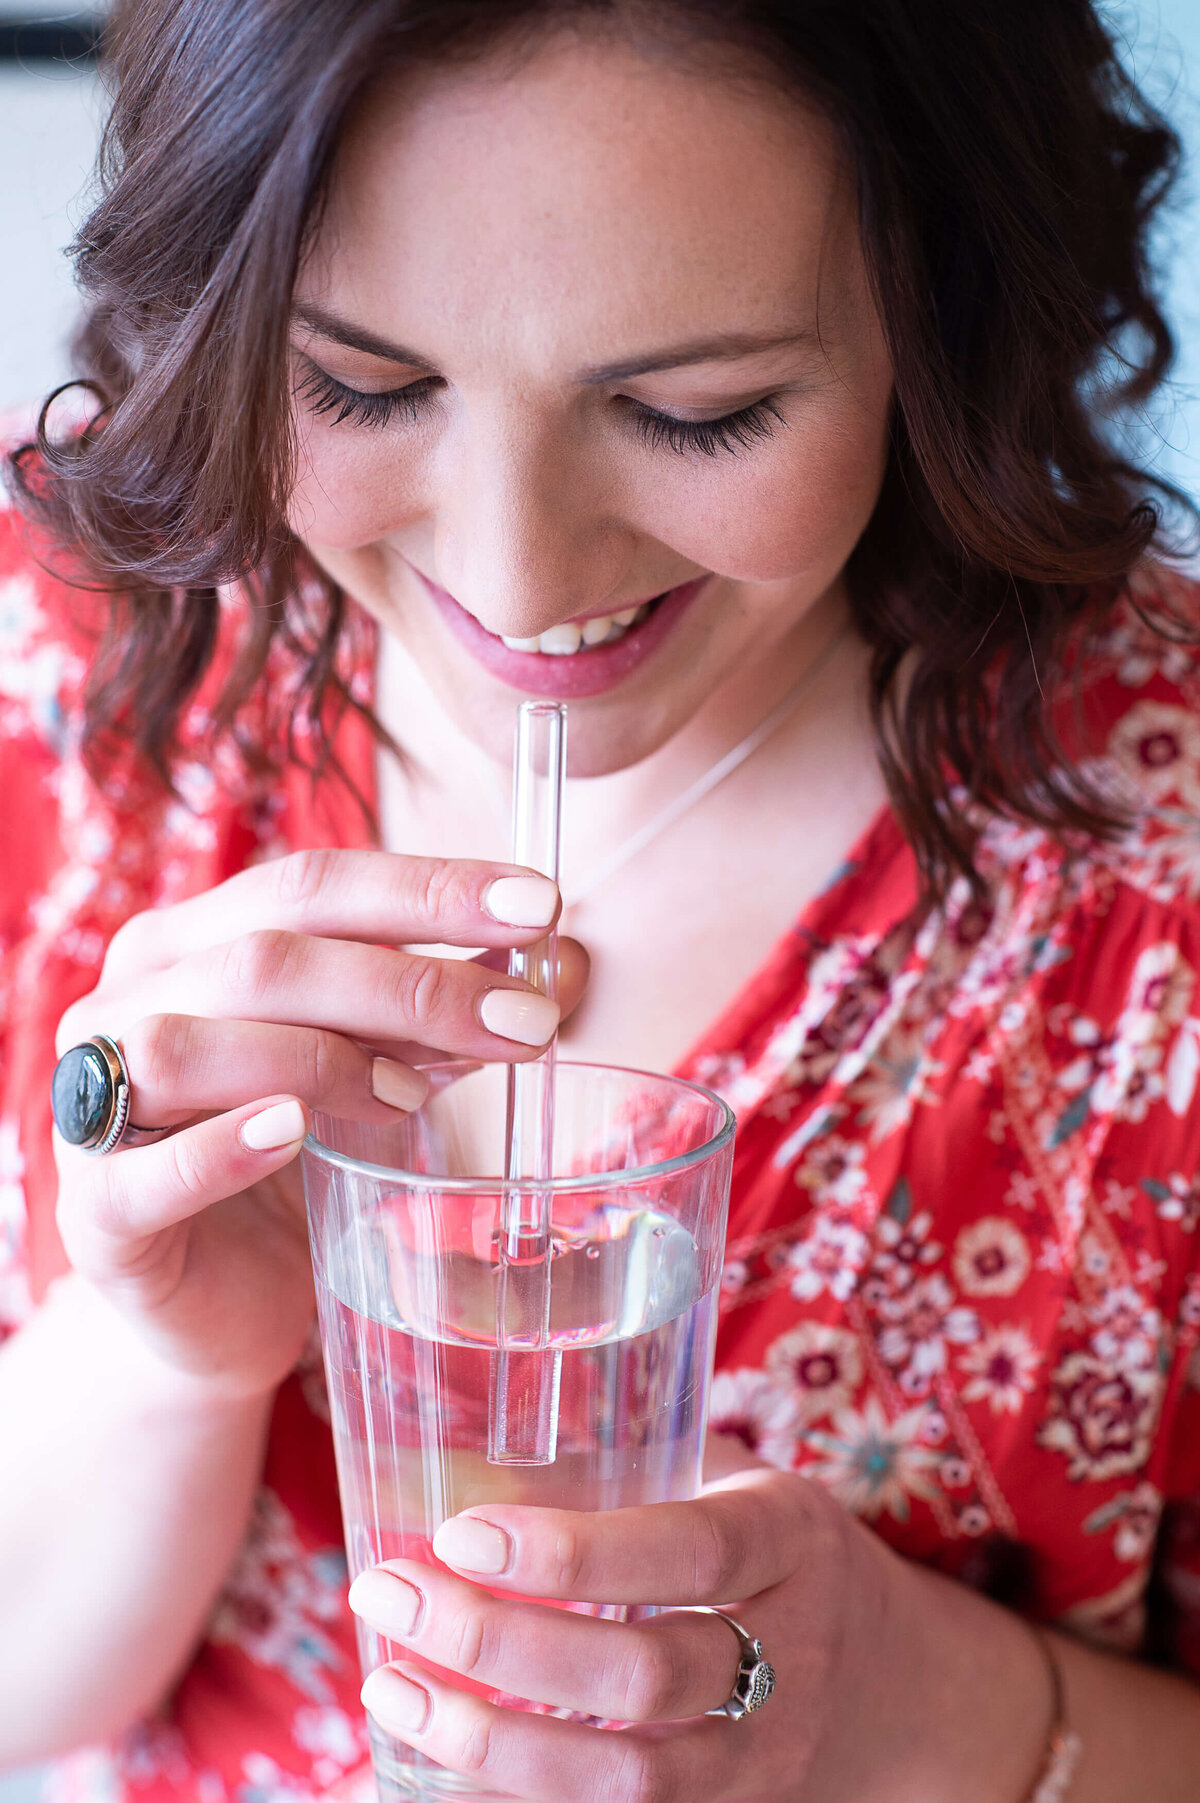 Ottawa branding photography showing the use of a glass straw in a drink